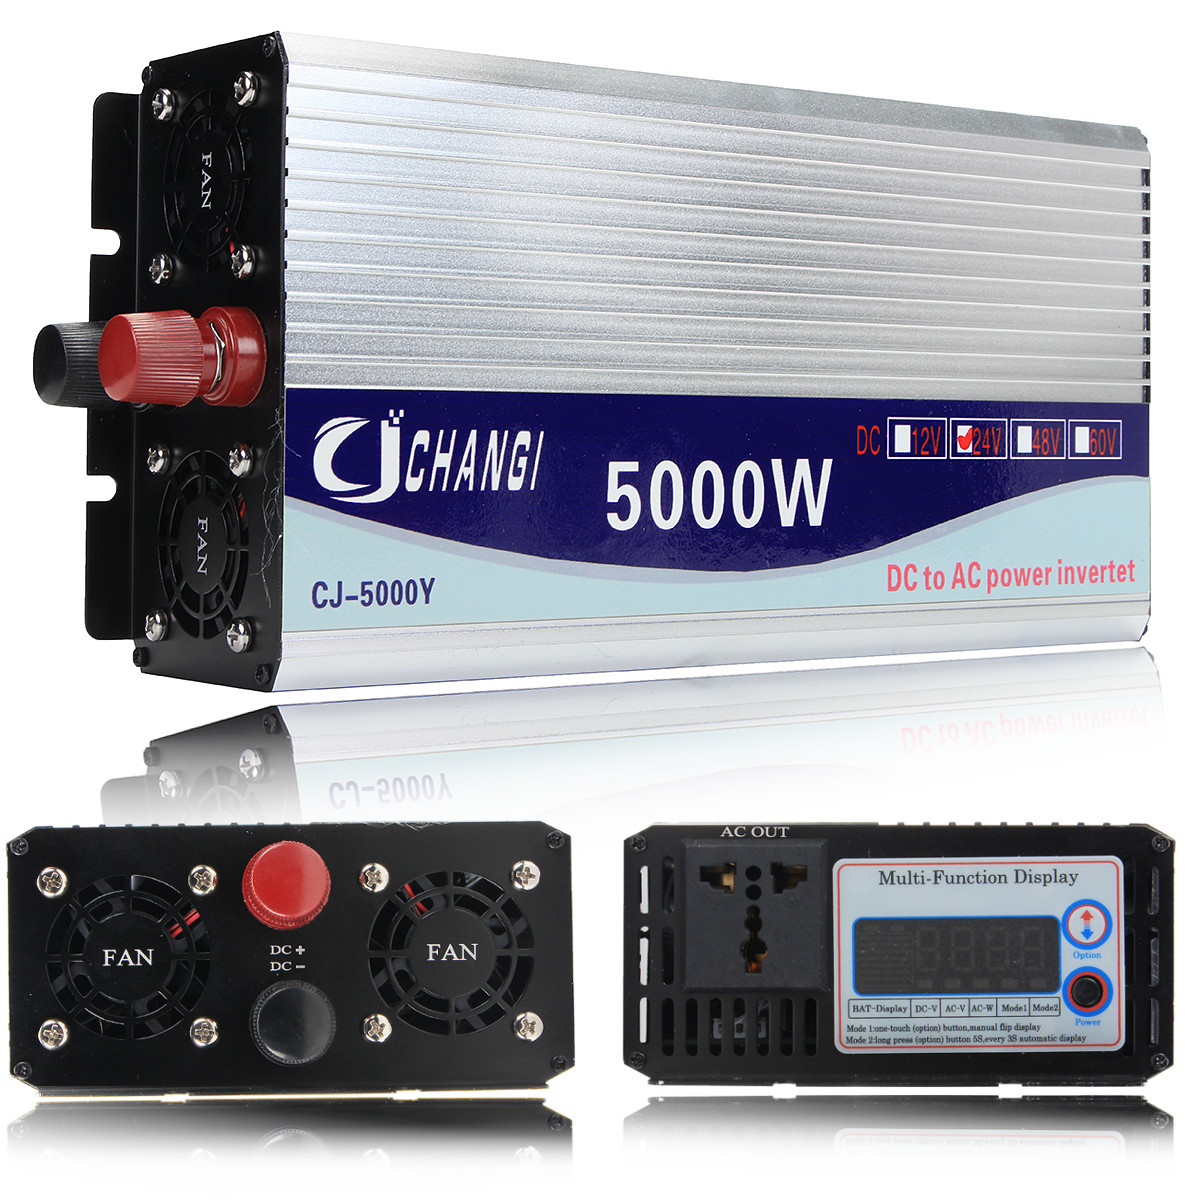 

DC 12-48V to AC 110V 10000W Peak Modified Sine Wave Power Inverter Converter with LCD Display